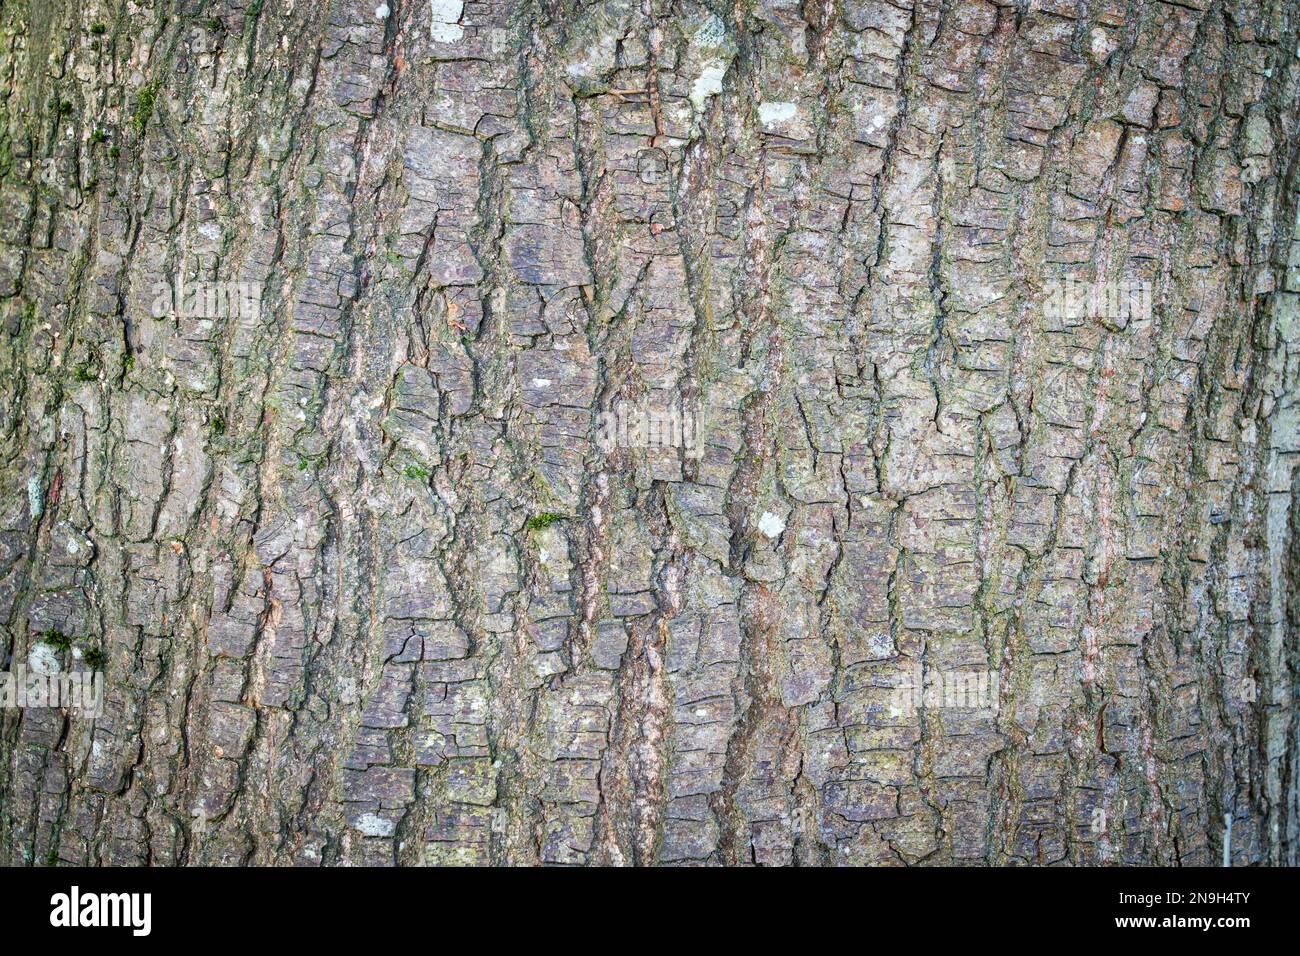 Tree bark abstract texture background pattern multi use abstract image Stock Photo